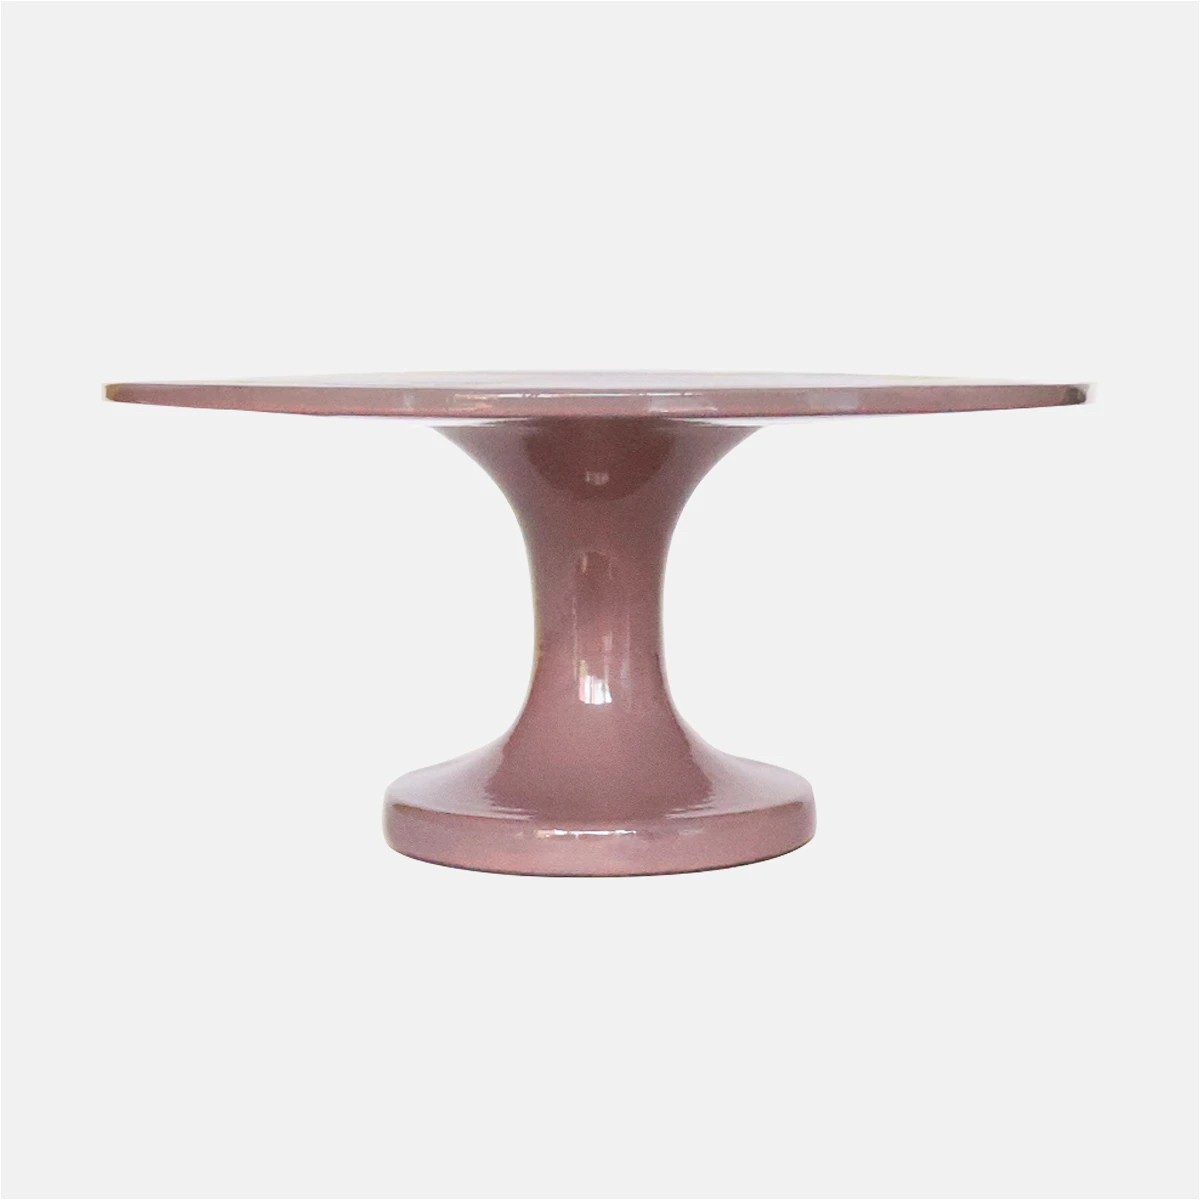 The image of an Assisi Cake Stand product